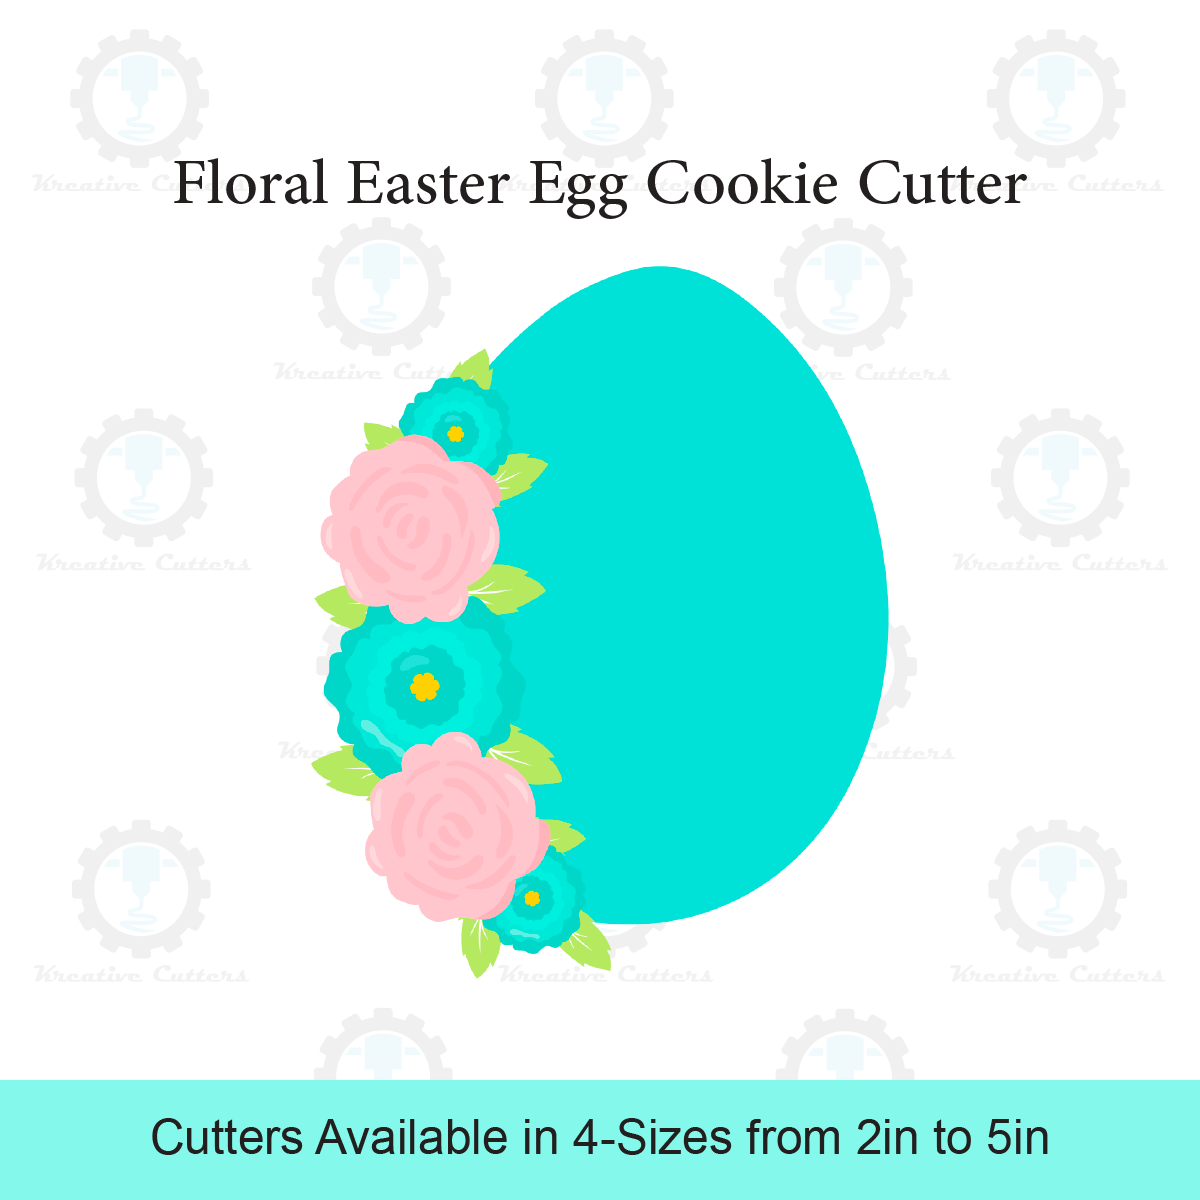 Floral Easter Egg Cookie Cutter